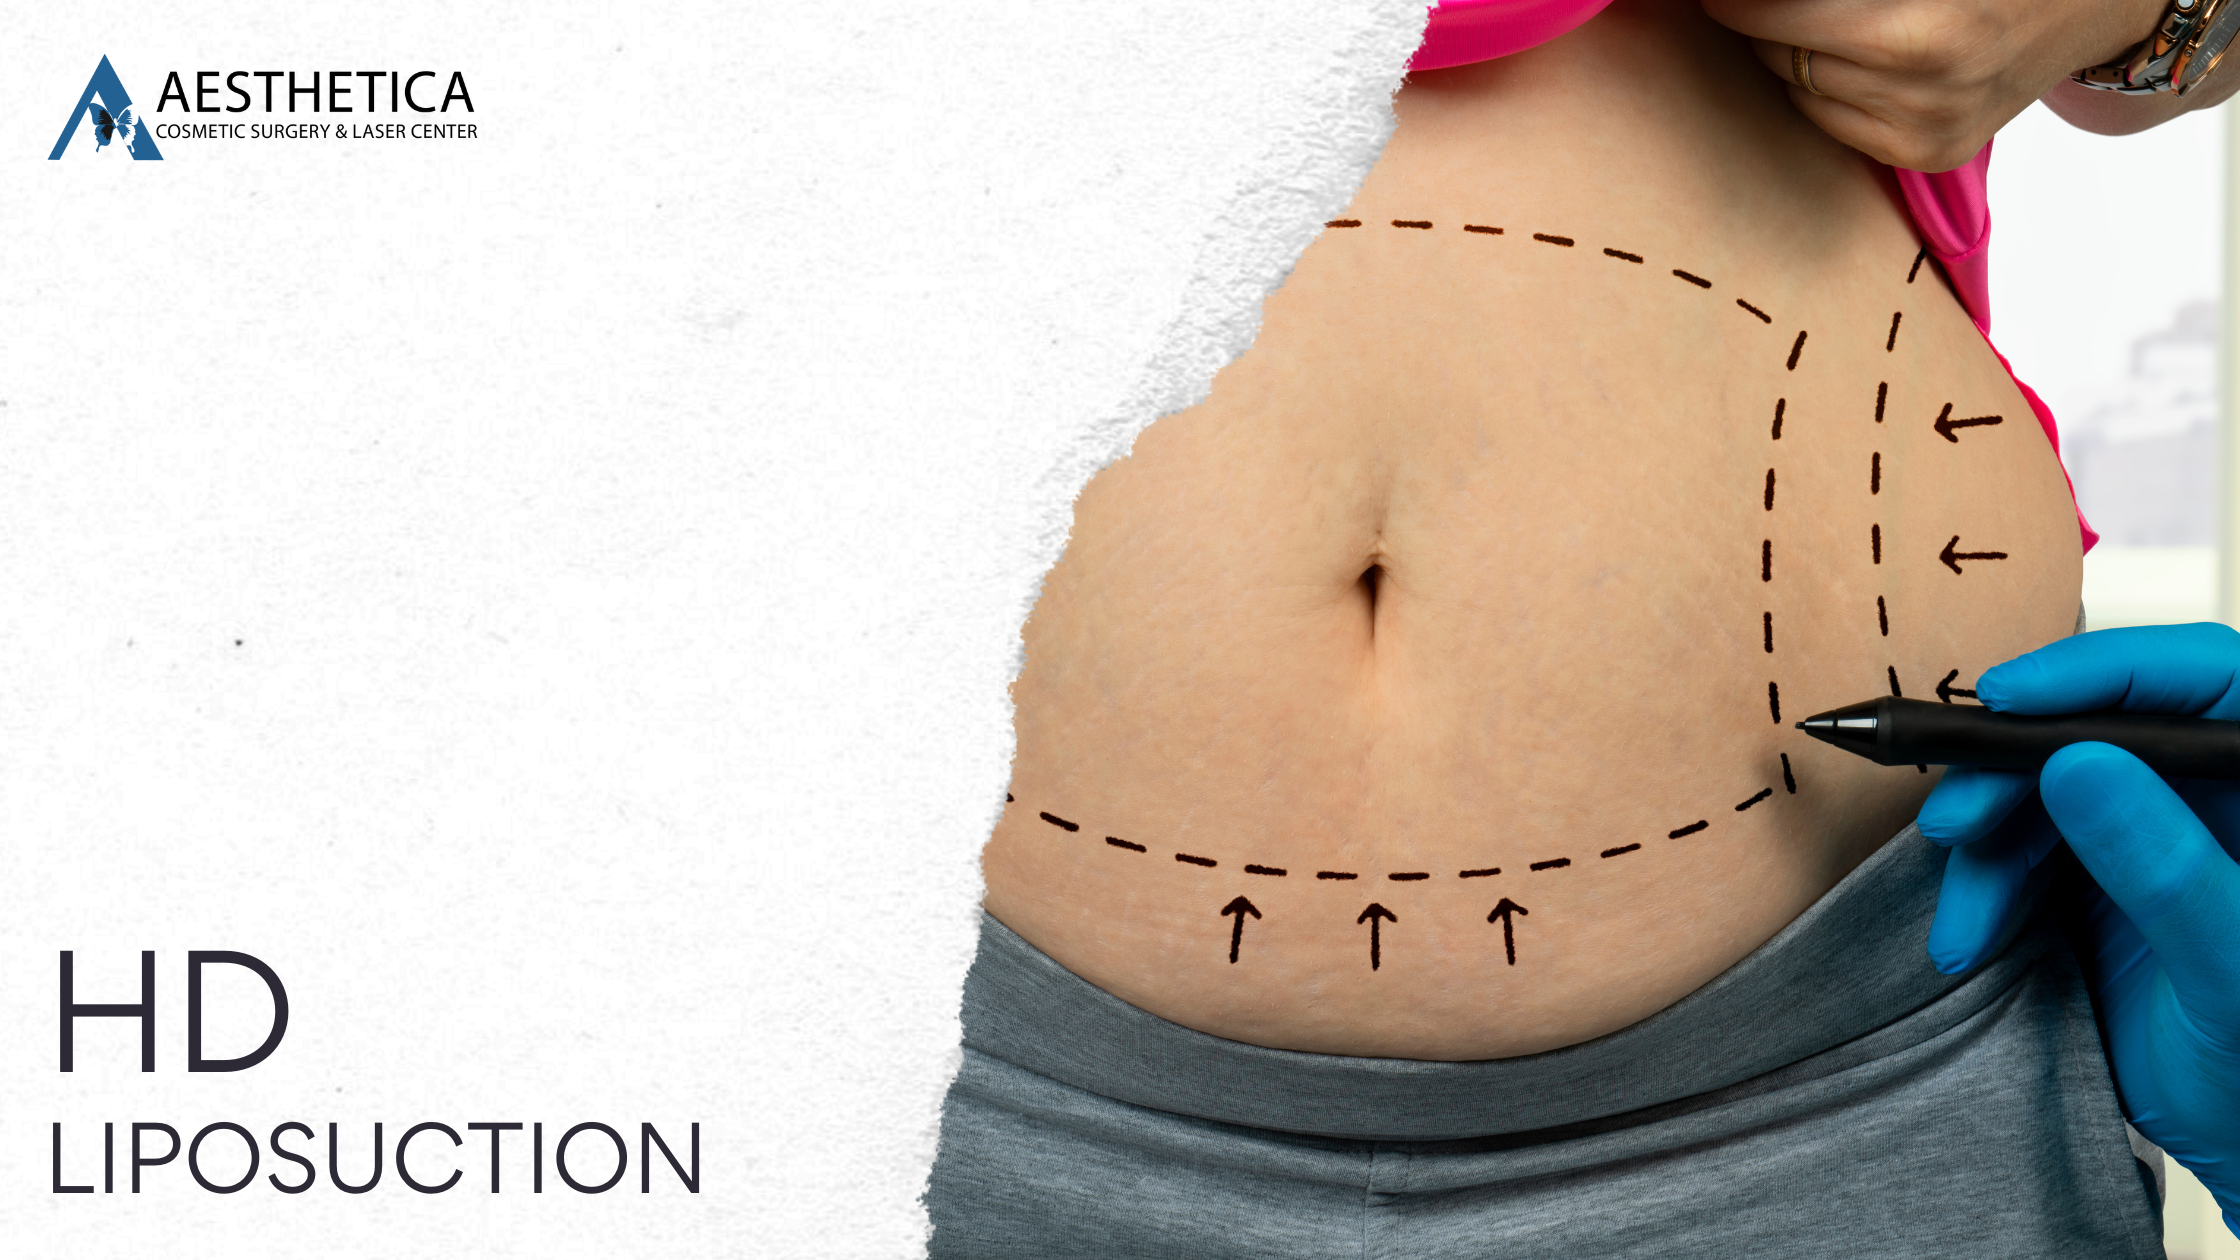 What Is High-Definition Liposuction?